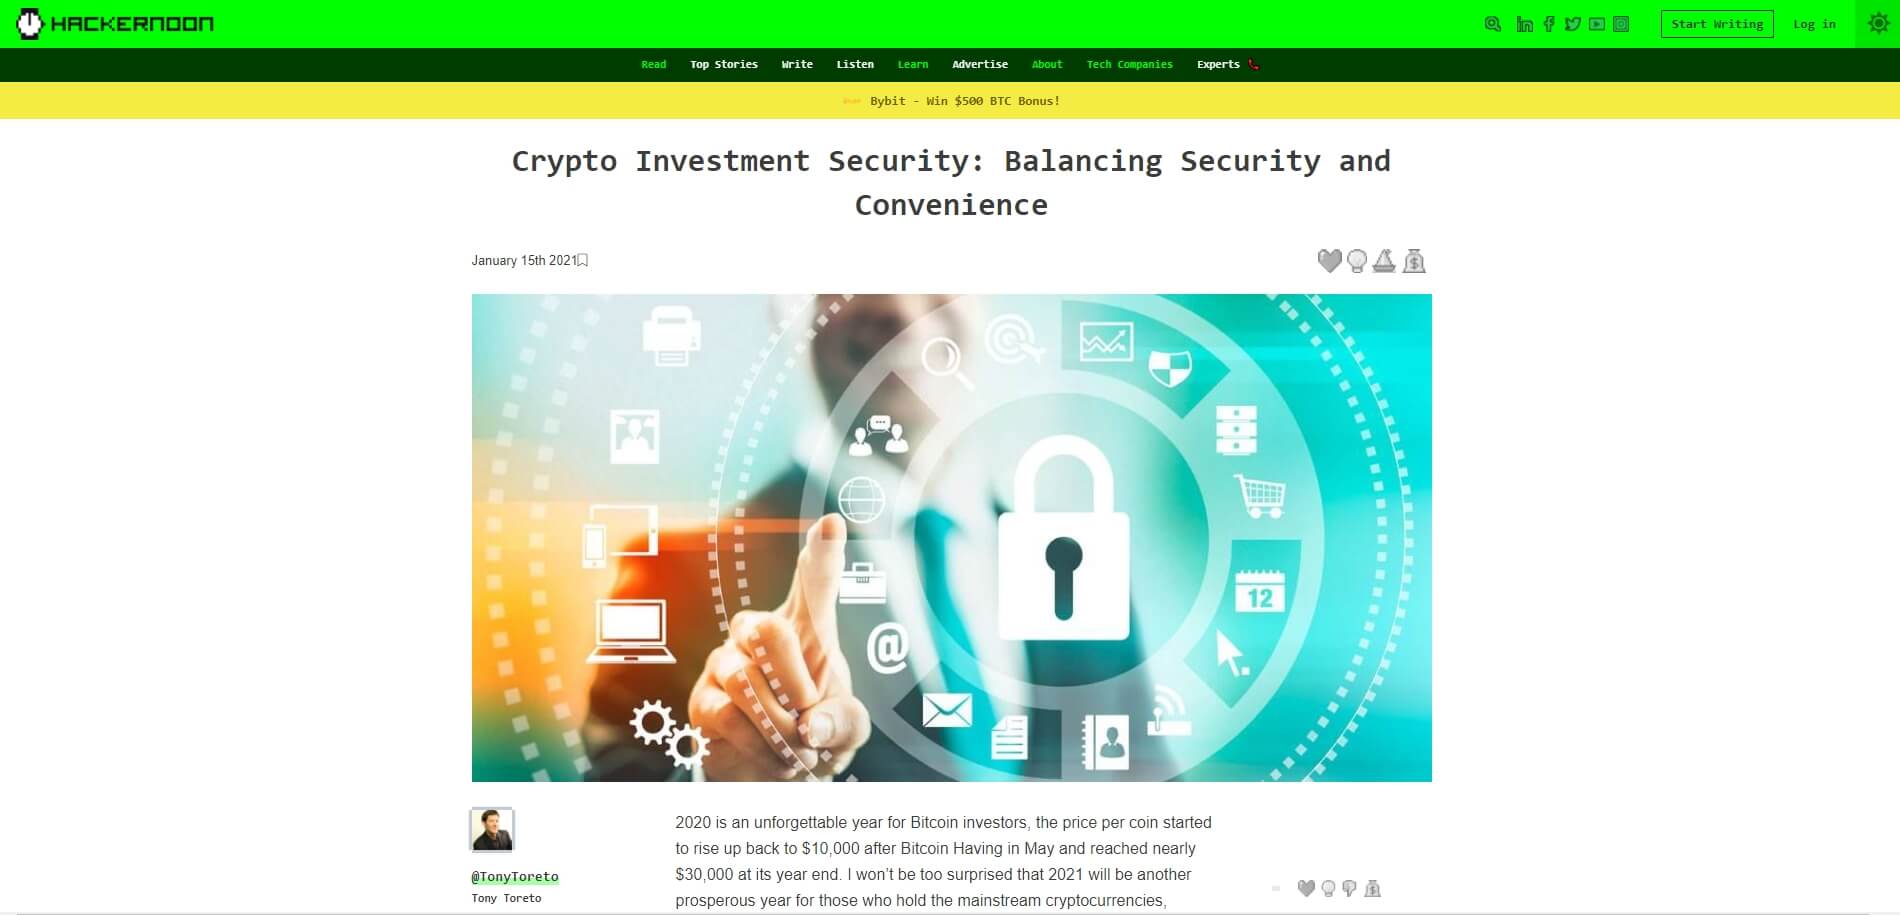 2021 1 15 Crypto Investment Security Balancing Security and Convenience